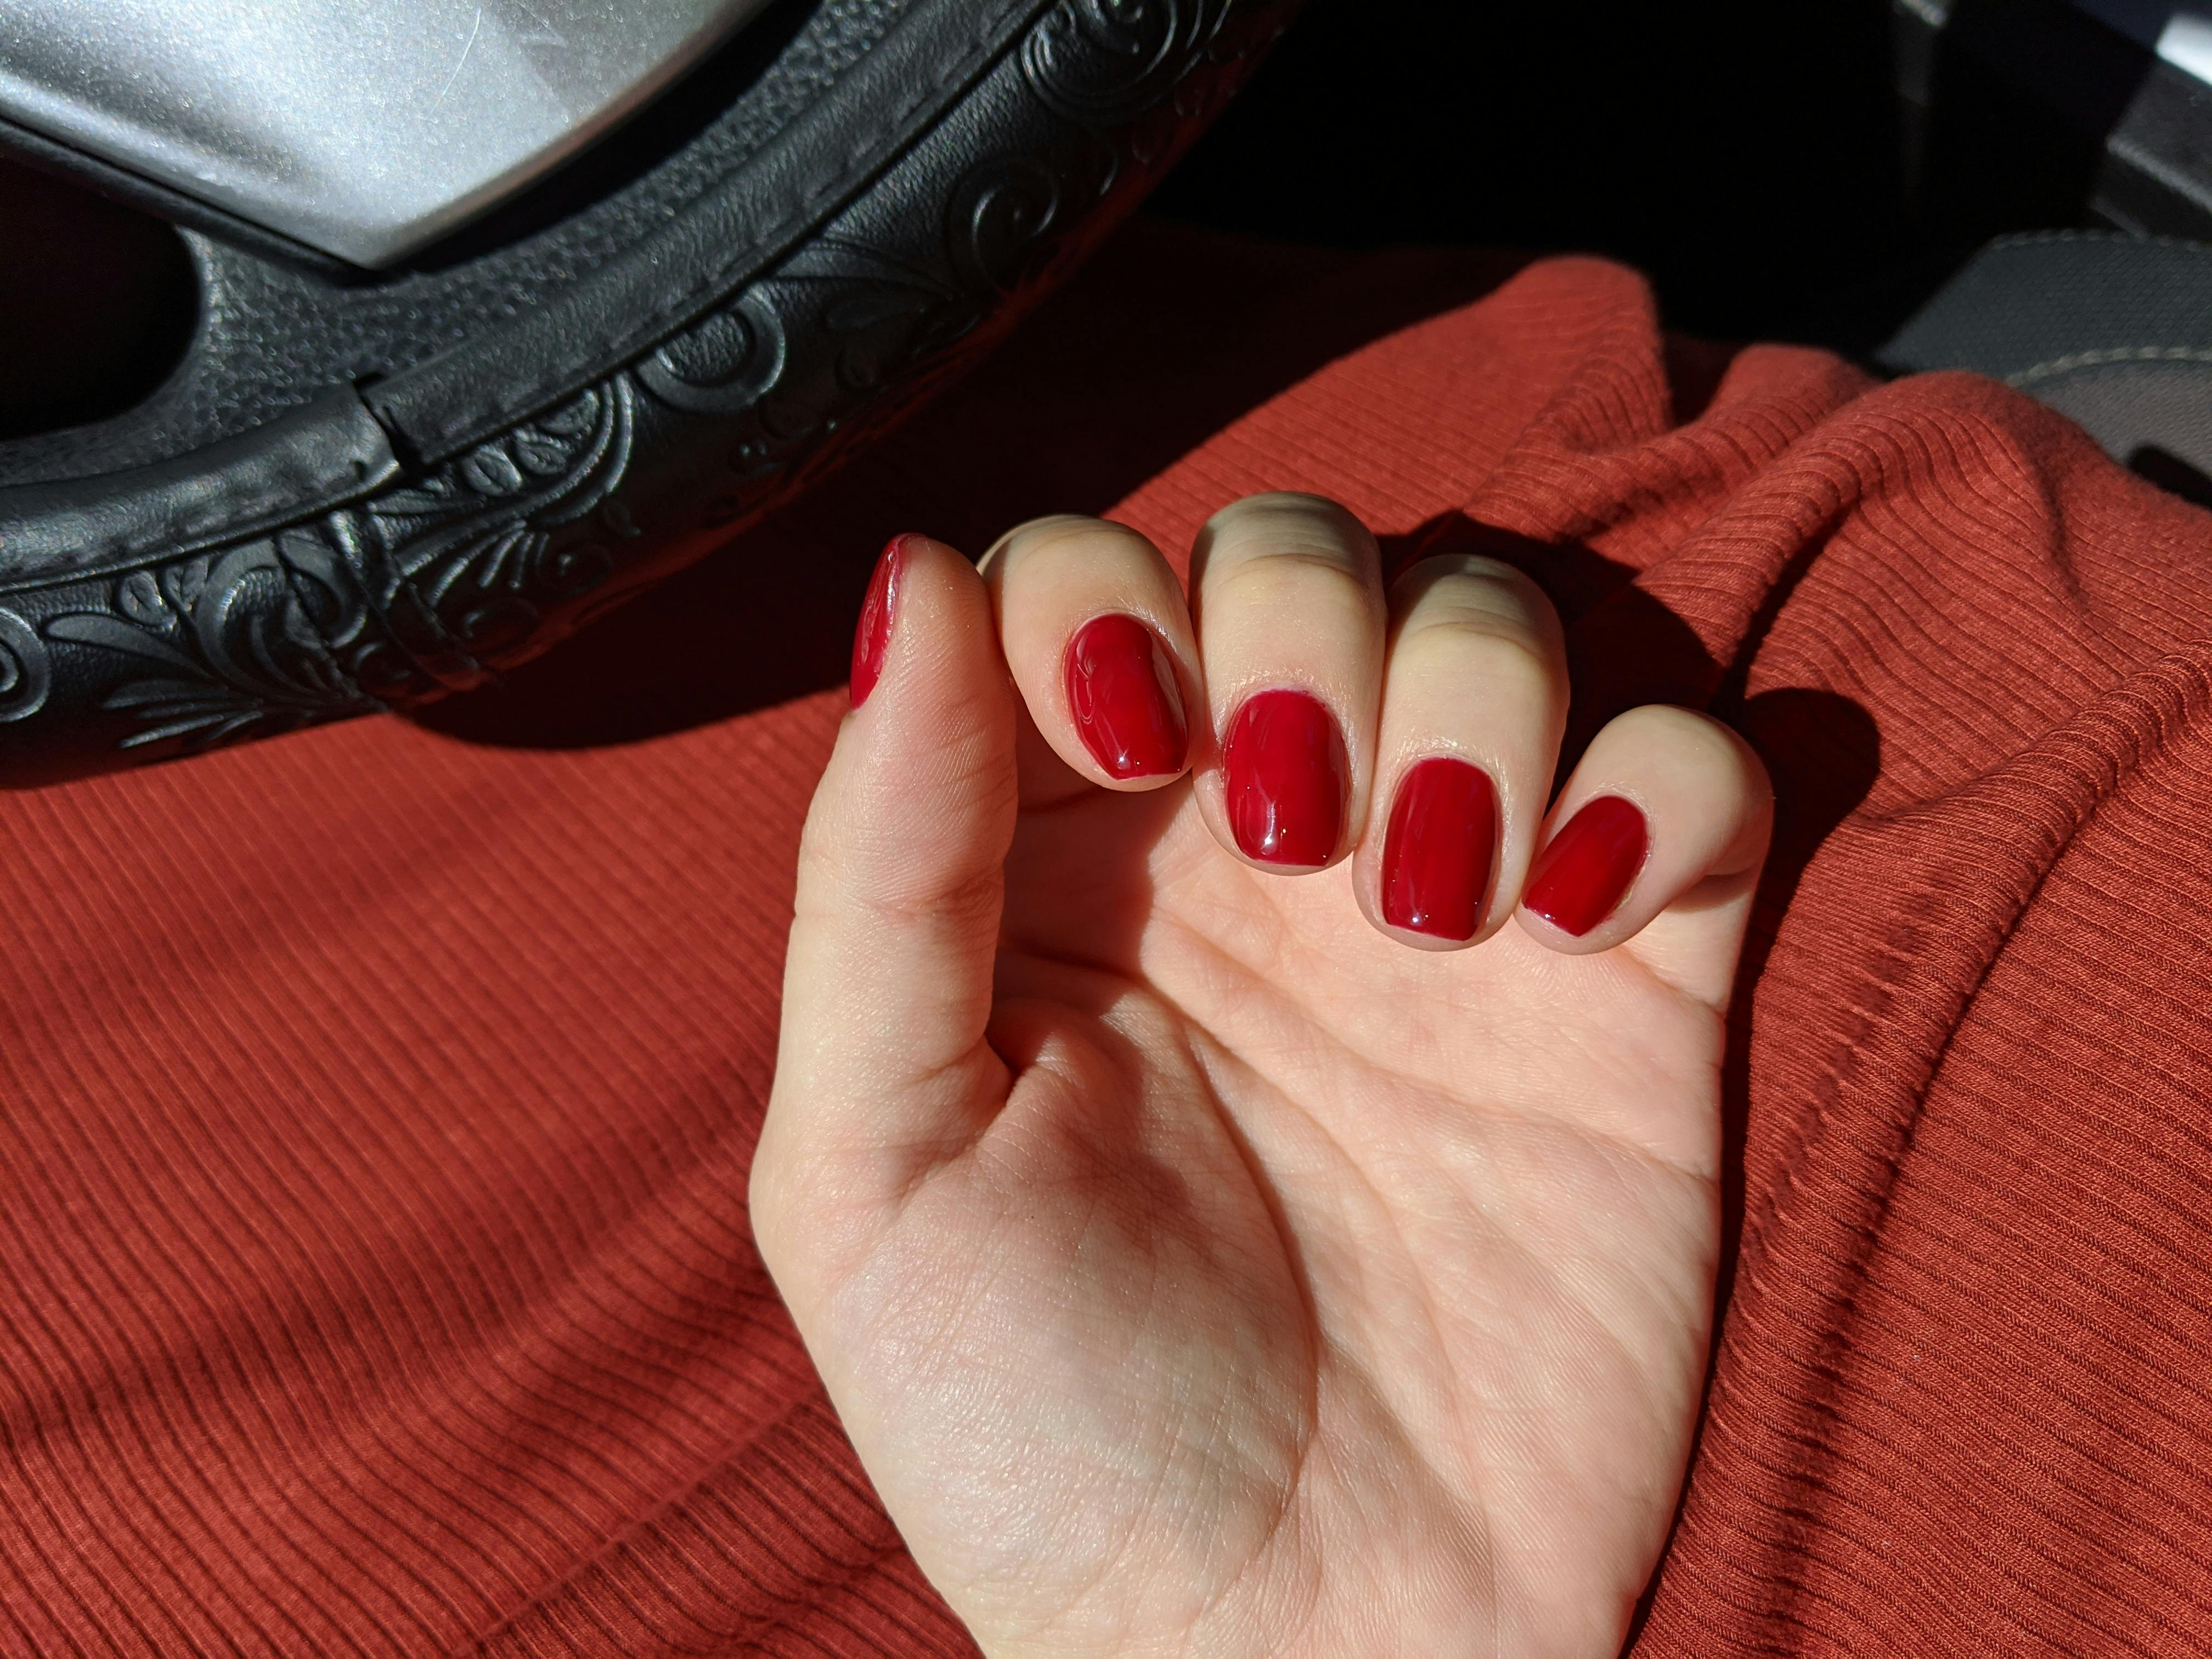 chick flick cherry opi number